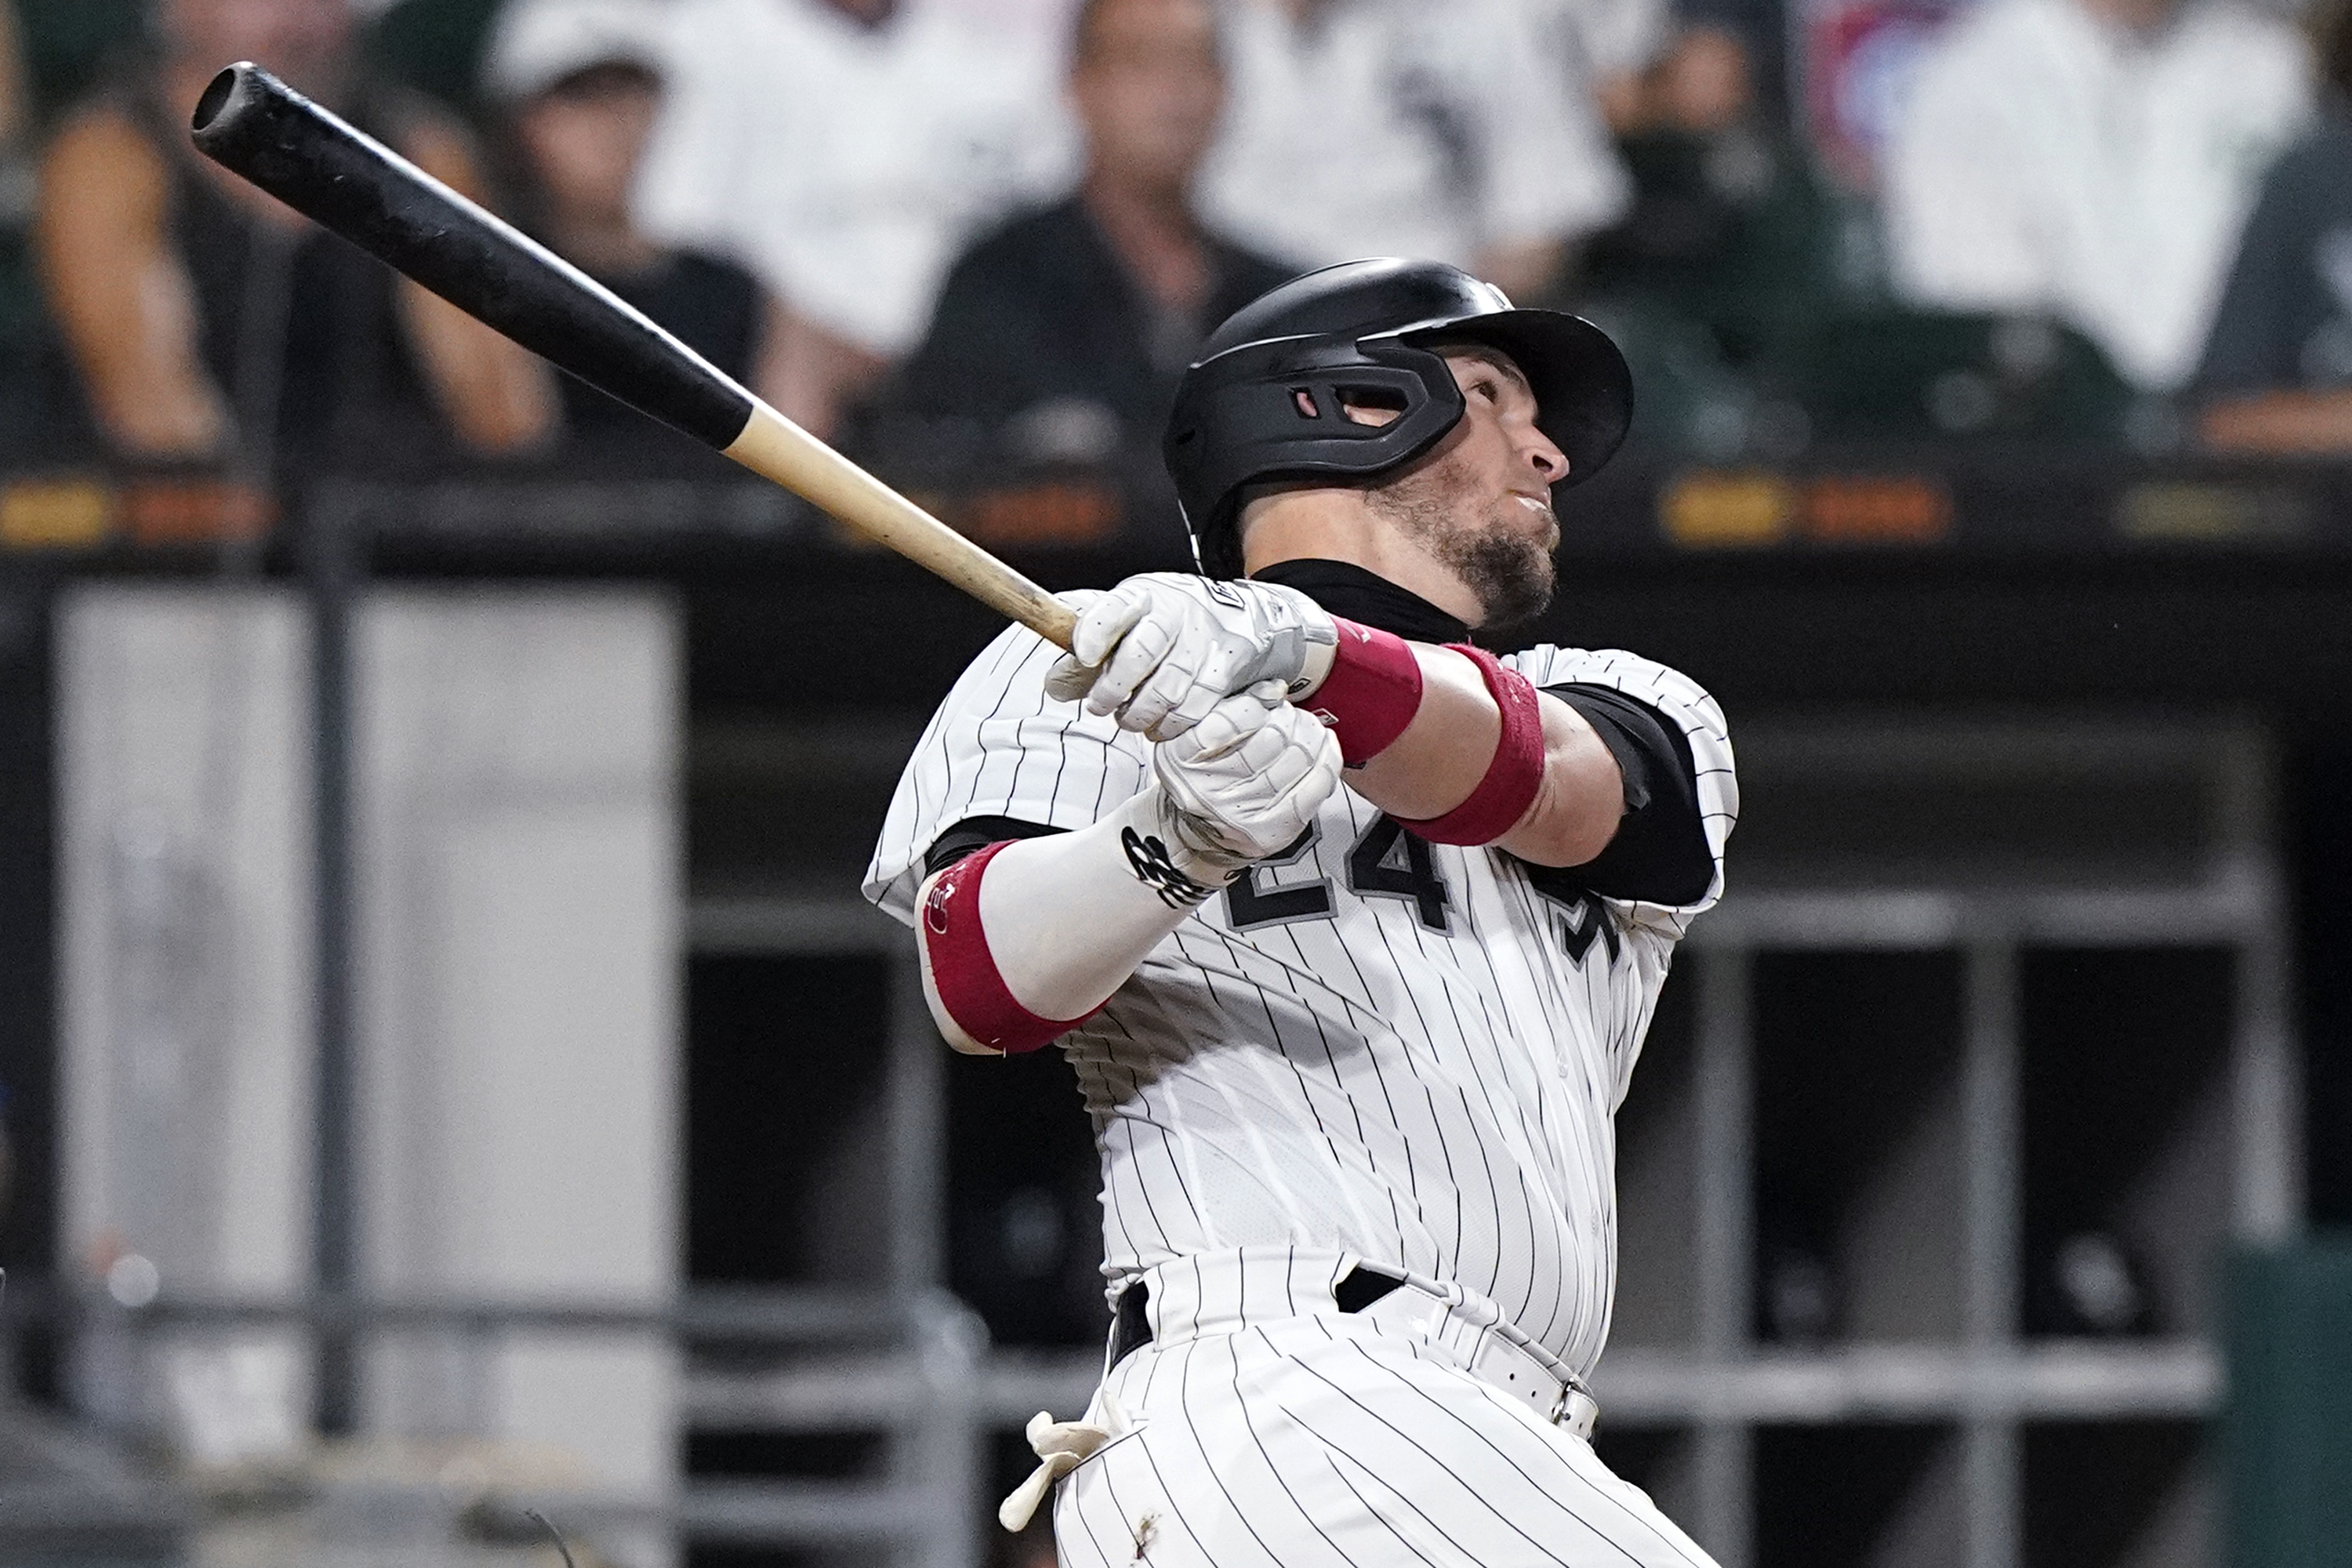 Andrew Vaughn hits 20th home run in White Sox loss vs. Twins